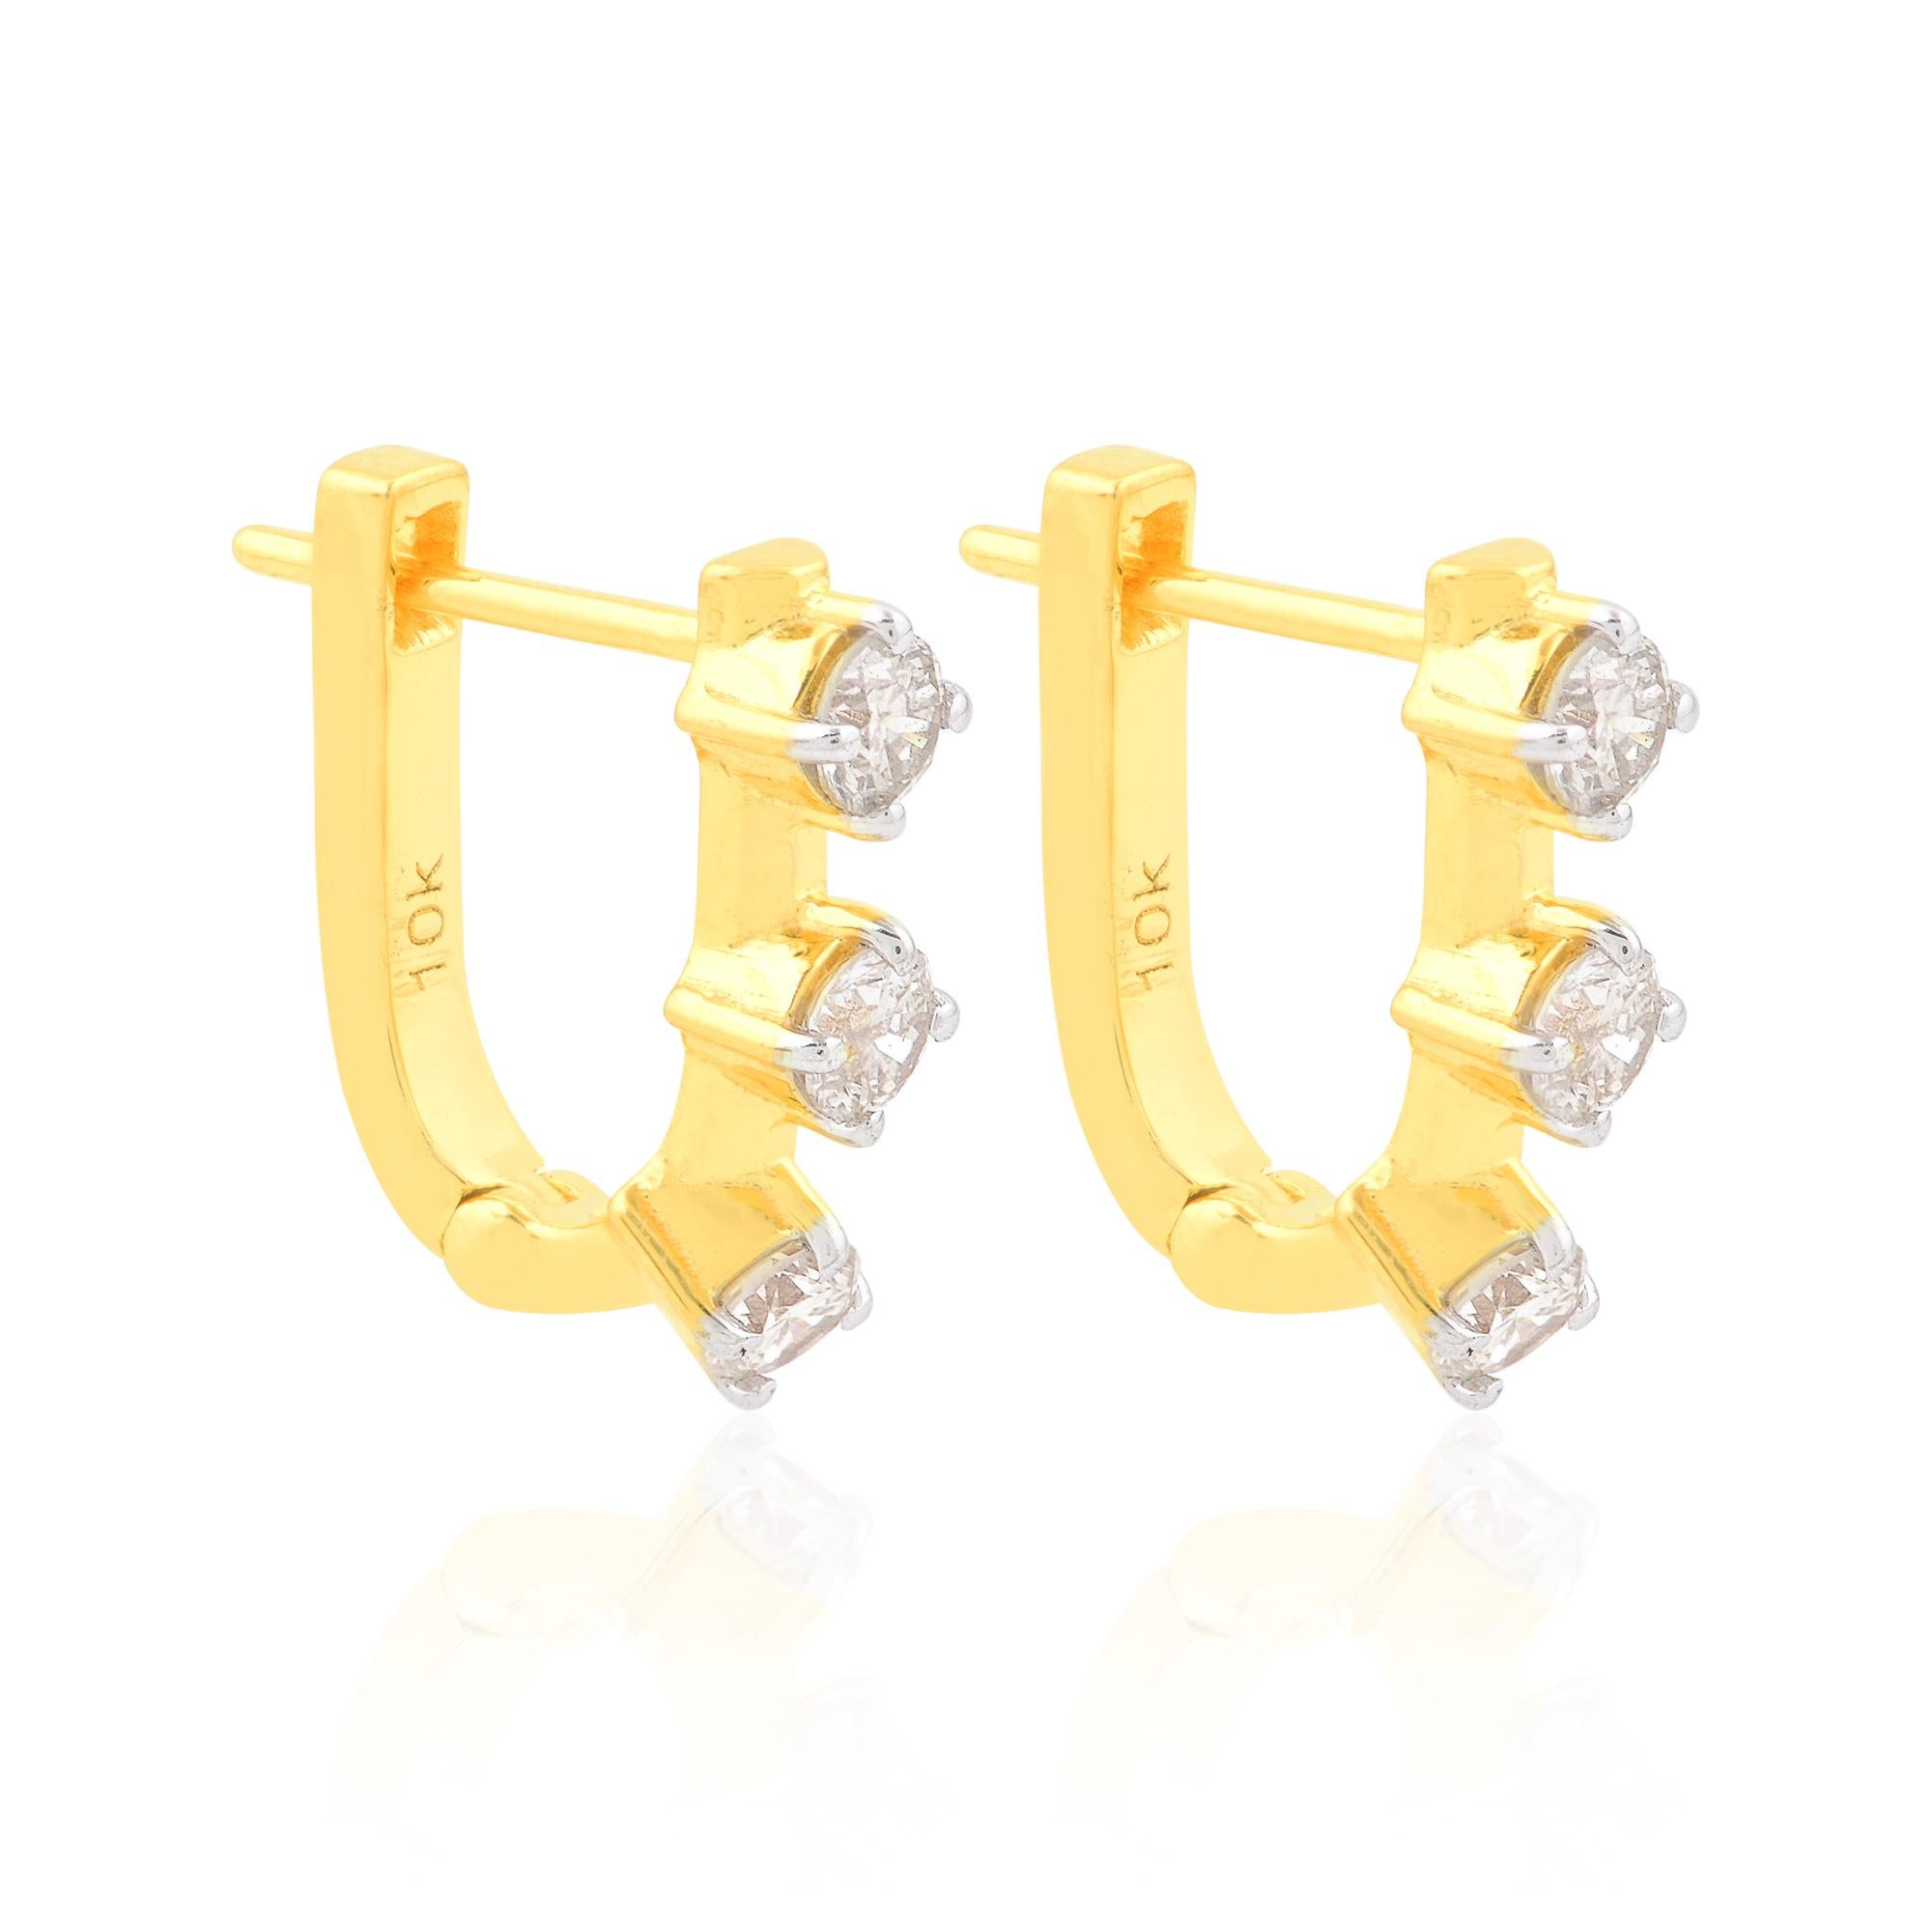  Item Code :- STE-1147
Gross Weight :- 1.90 gm
10k Yellow Gold Weight :- 1.80 gm
Diamond Weight :- 0.51 carat  ( AVERAGE DIAMOND CLARITY SI1-SI2 & COLOR H-I )
Earrings Length :- 12 mm approx.

✦ Sizing
.....................
We can adjust most items